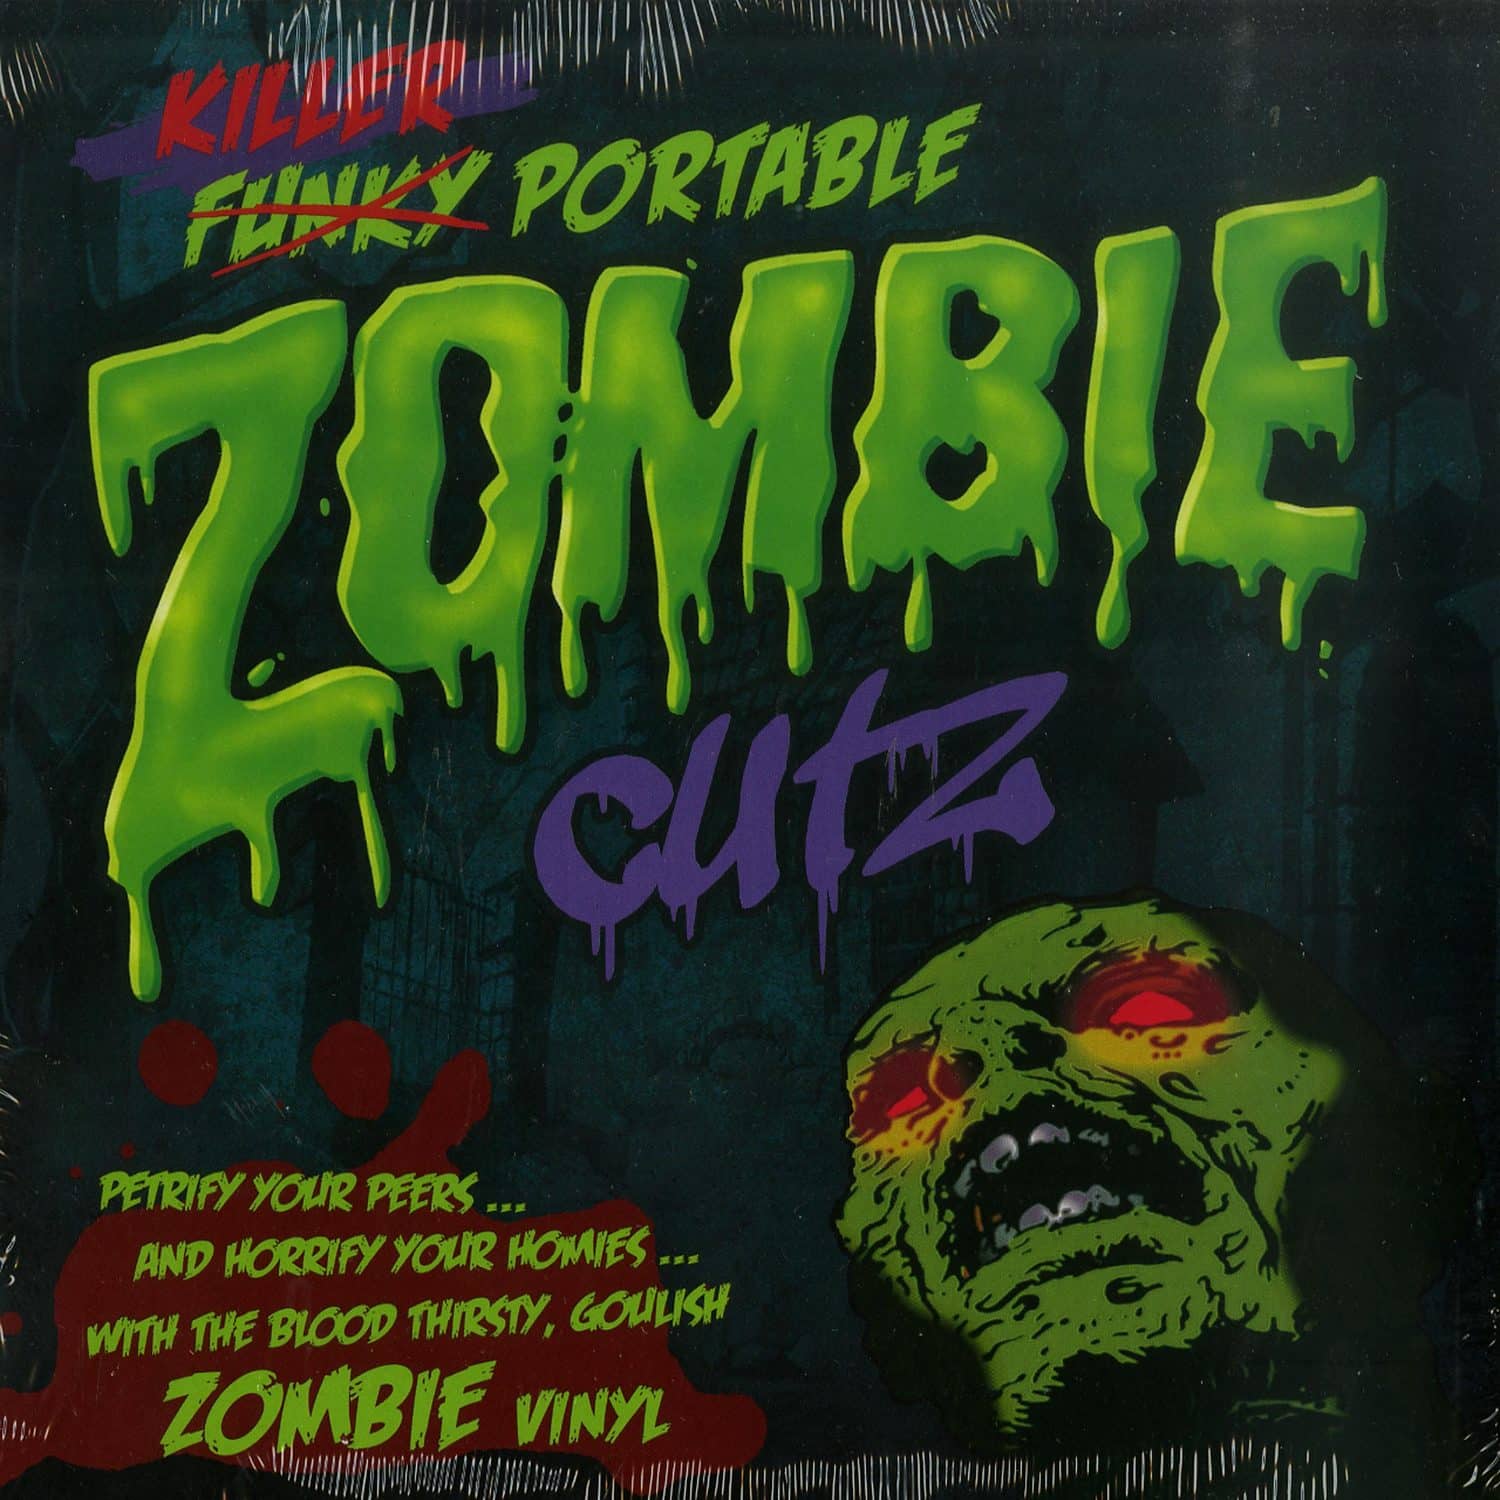 Crab Cake and Turntable Training Wax - KILLER PORTABLE ZOMBIE CUTZ! 